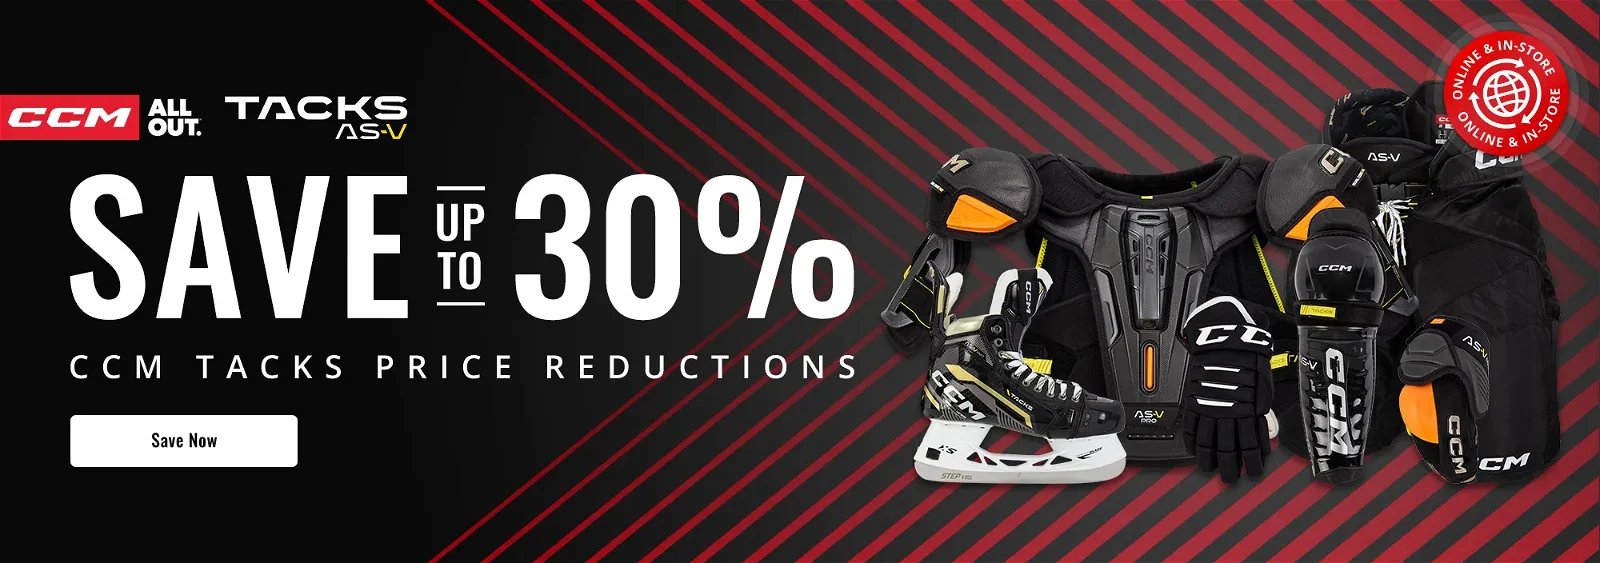 CCM Tacks Price Reductions | Save up to 30%